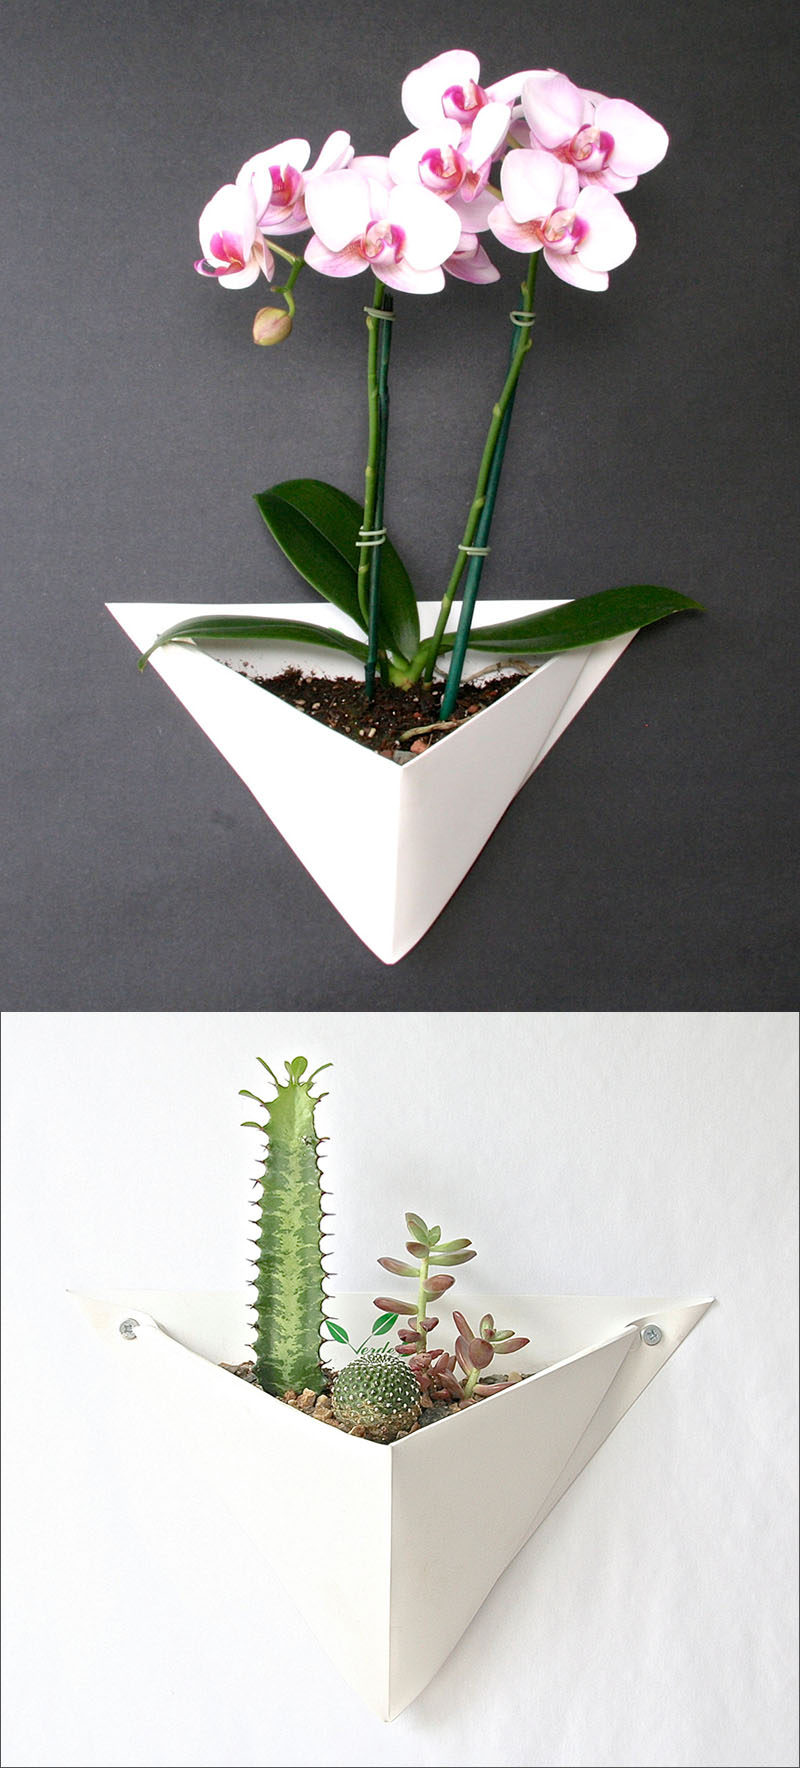 Made from folded sheet metal, these white origami-inspired wall planters create the perfect home for a small succulent garden, a large air plant, or even an orchid. #WallMountedPlanters #WallPlanters #Decor #HomeDecor #Plants #Gardening